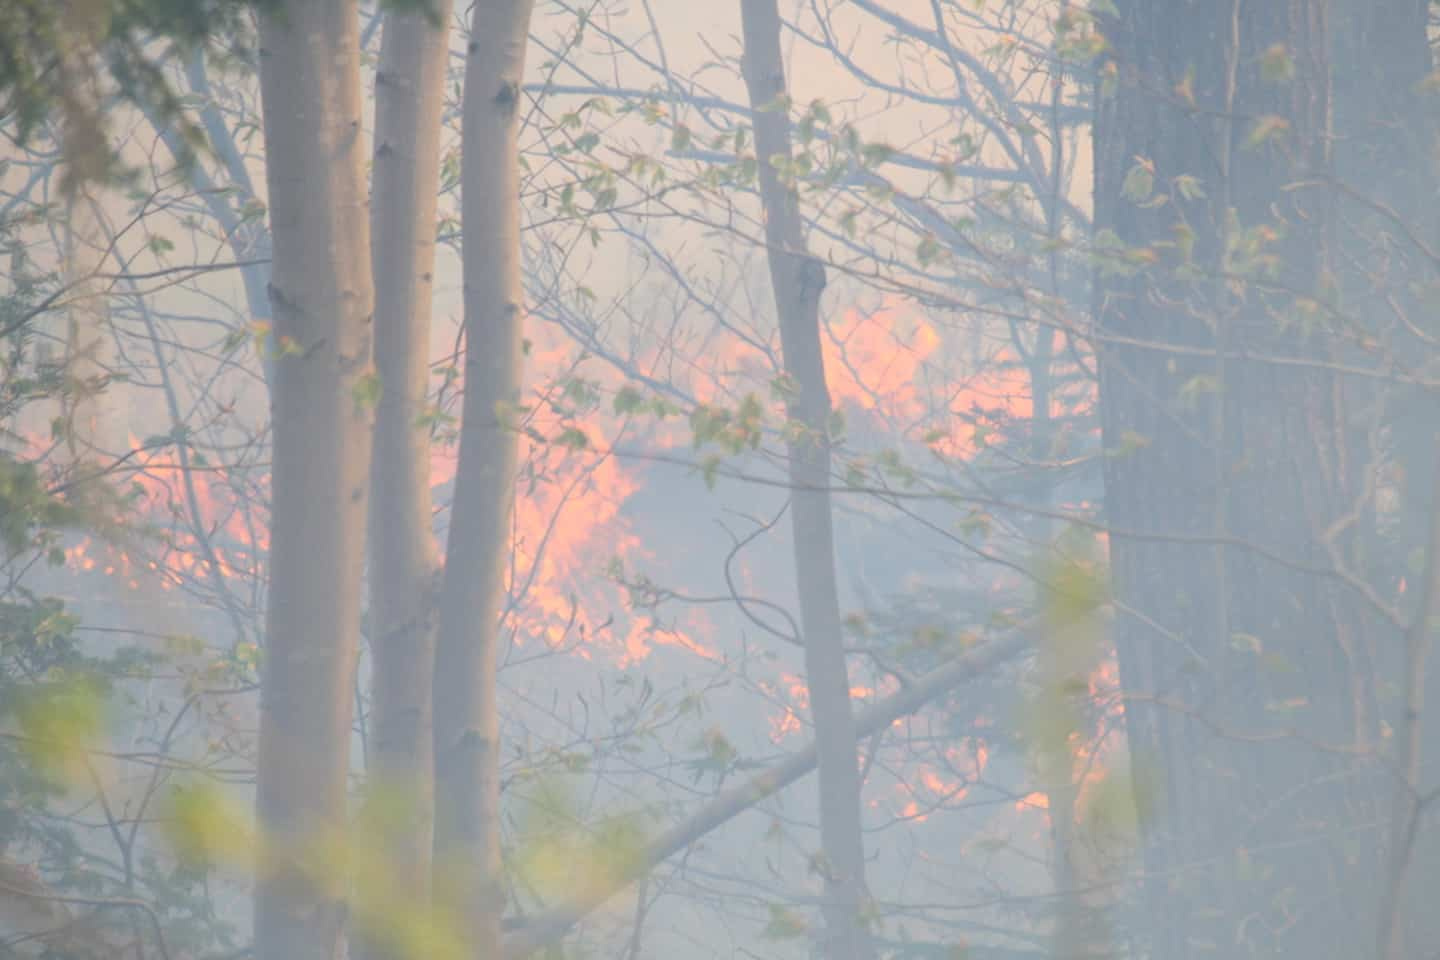 Forest fires in Manitoba: an evacuation operation for the Red Cross